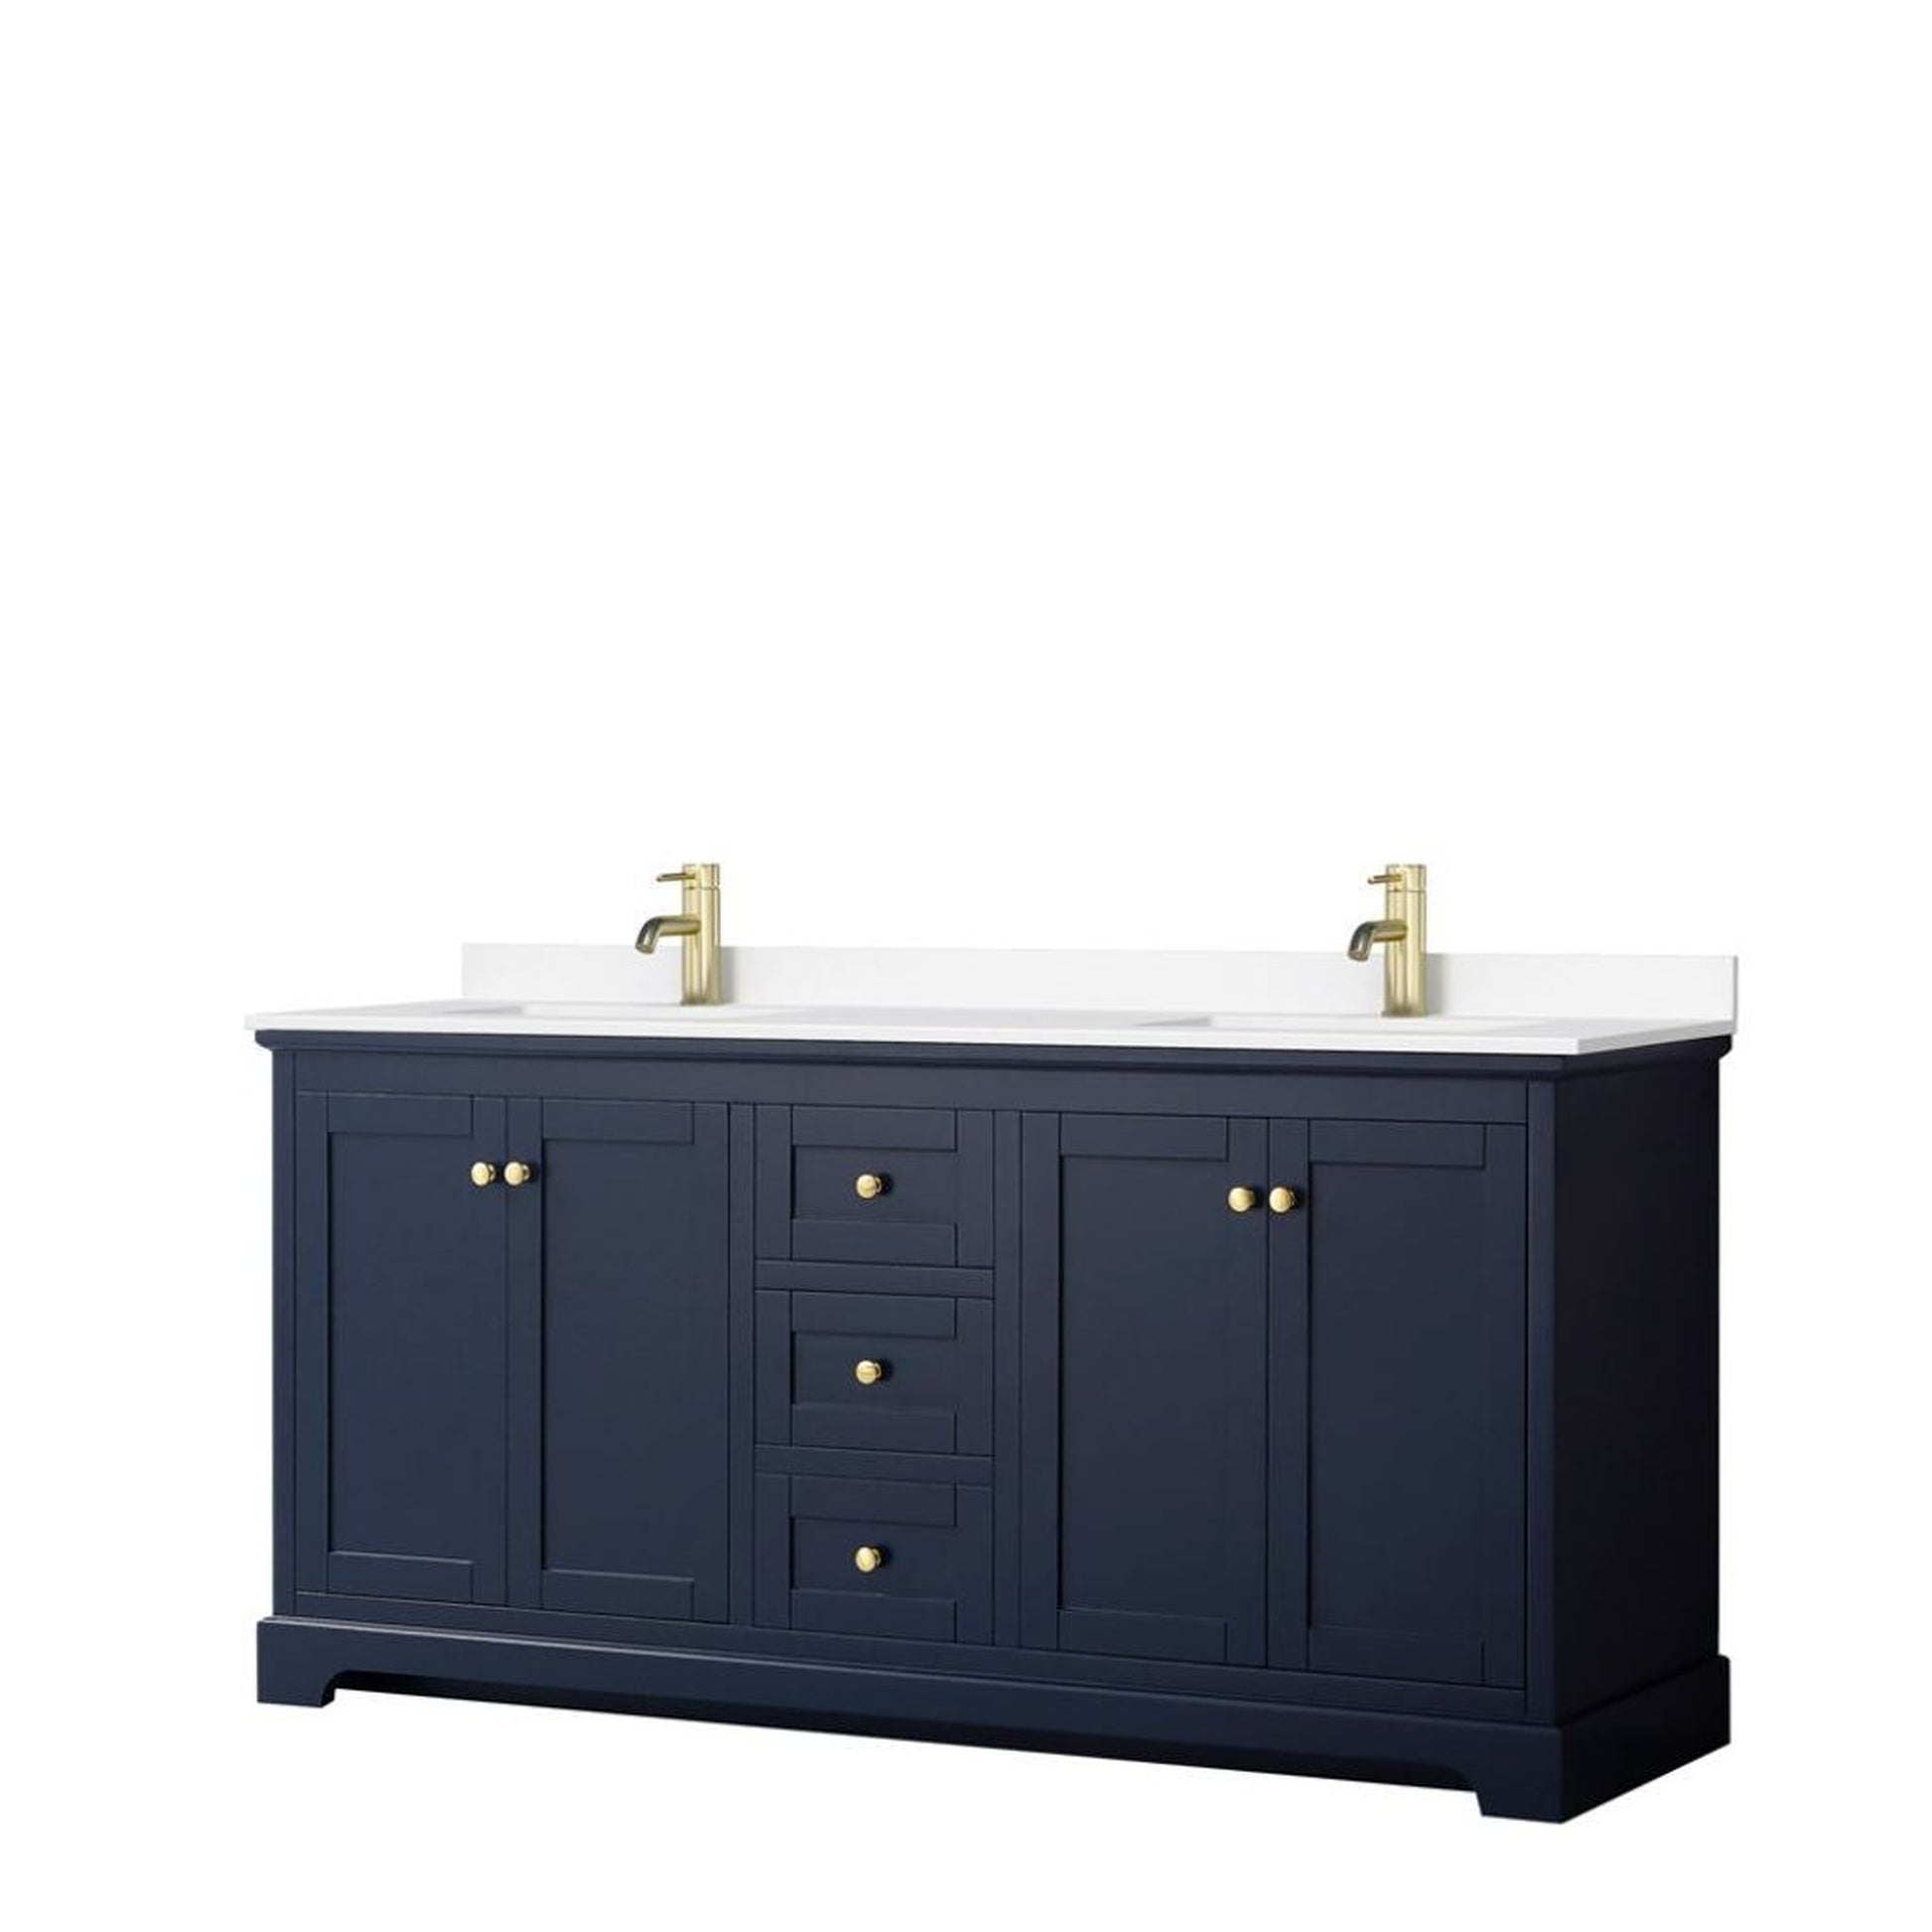 Wyndham Collection Avery 72" Dark Blue Double Bathroom Vanity With White Cultured Marble Countertop With 1-Hole Faucet And Square Sink